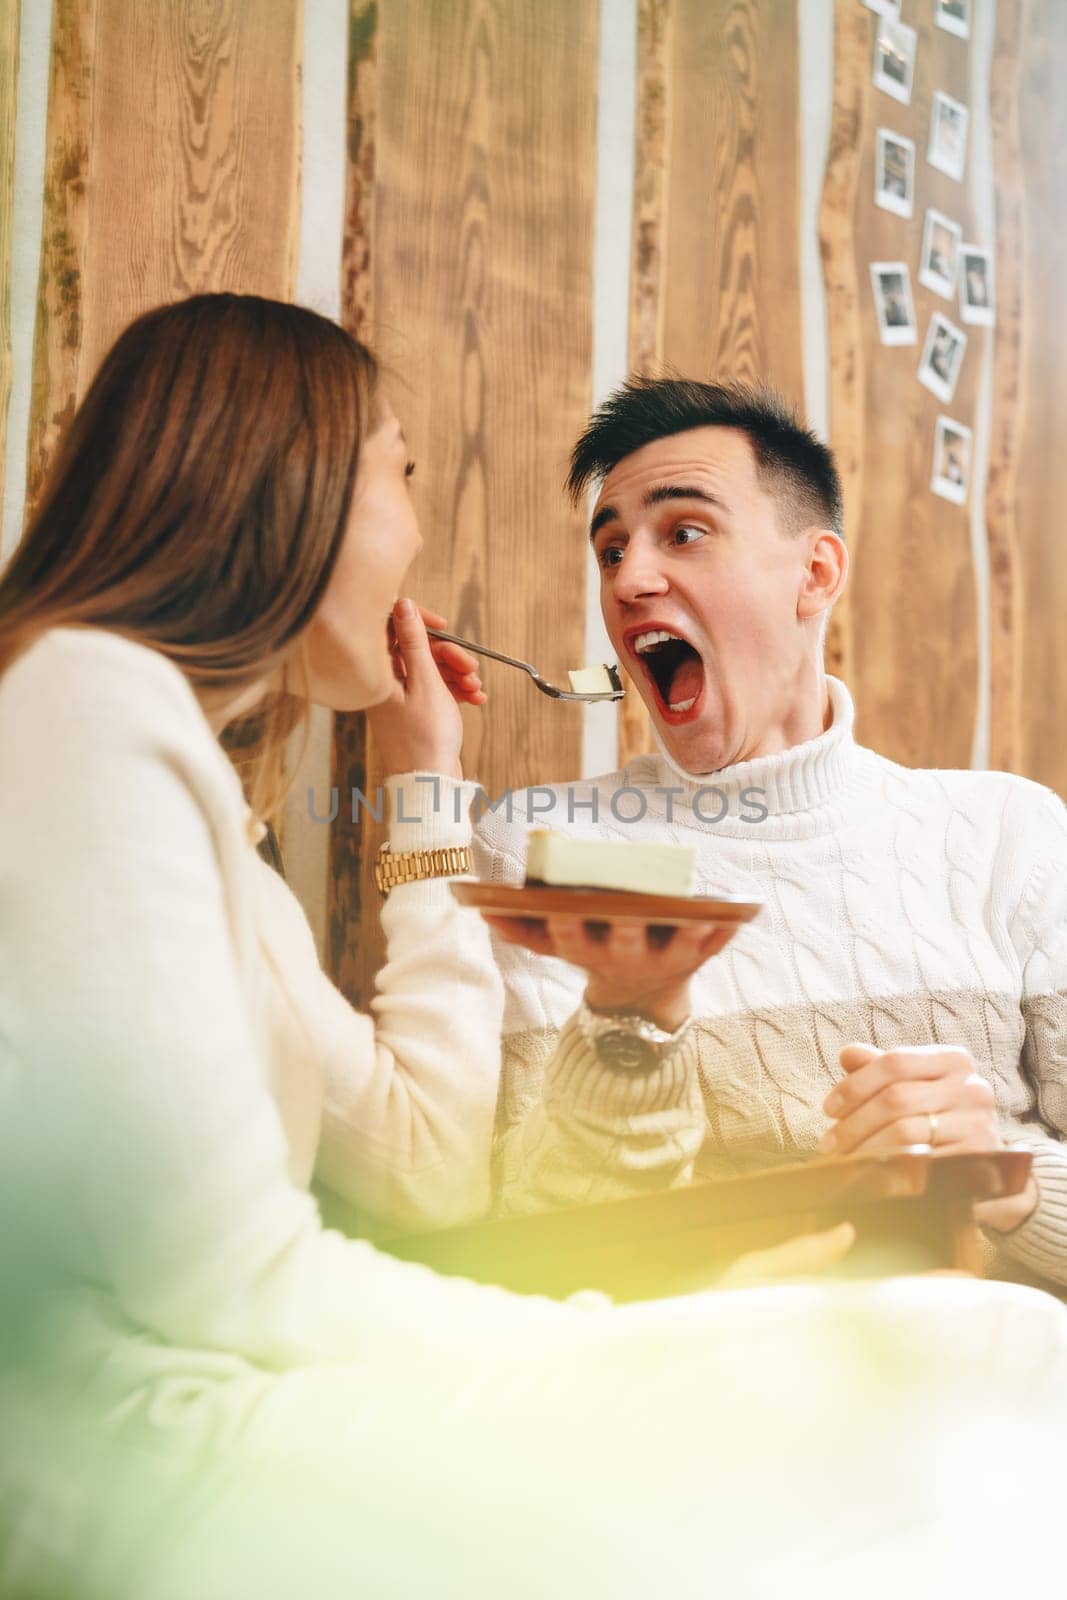 A joyful young man with an open mouth is eagerly anticipating a taste of dessert from a spoon held by his companion. They are seated in a warm and rustic wooden cabin, surrounded by a cozy ambiance and the soft glow of natural light. The moment captures casual domestic bliss and the simple pleasure of sharing food.